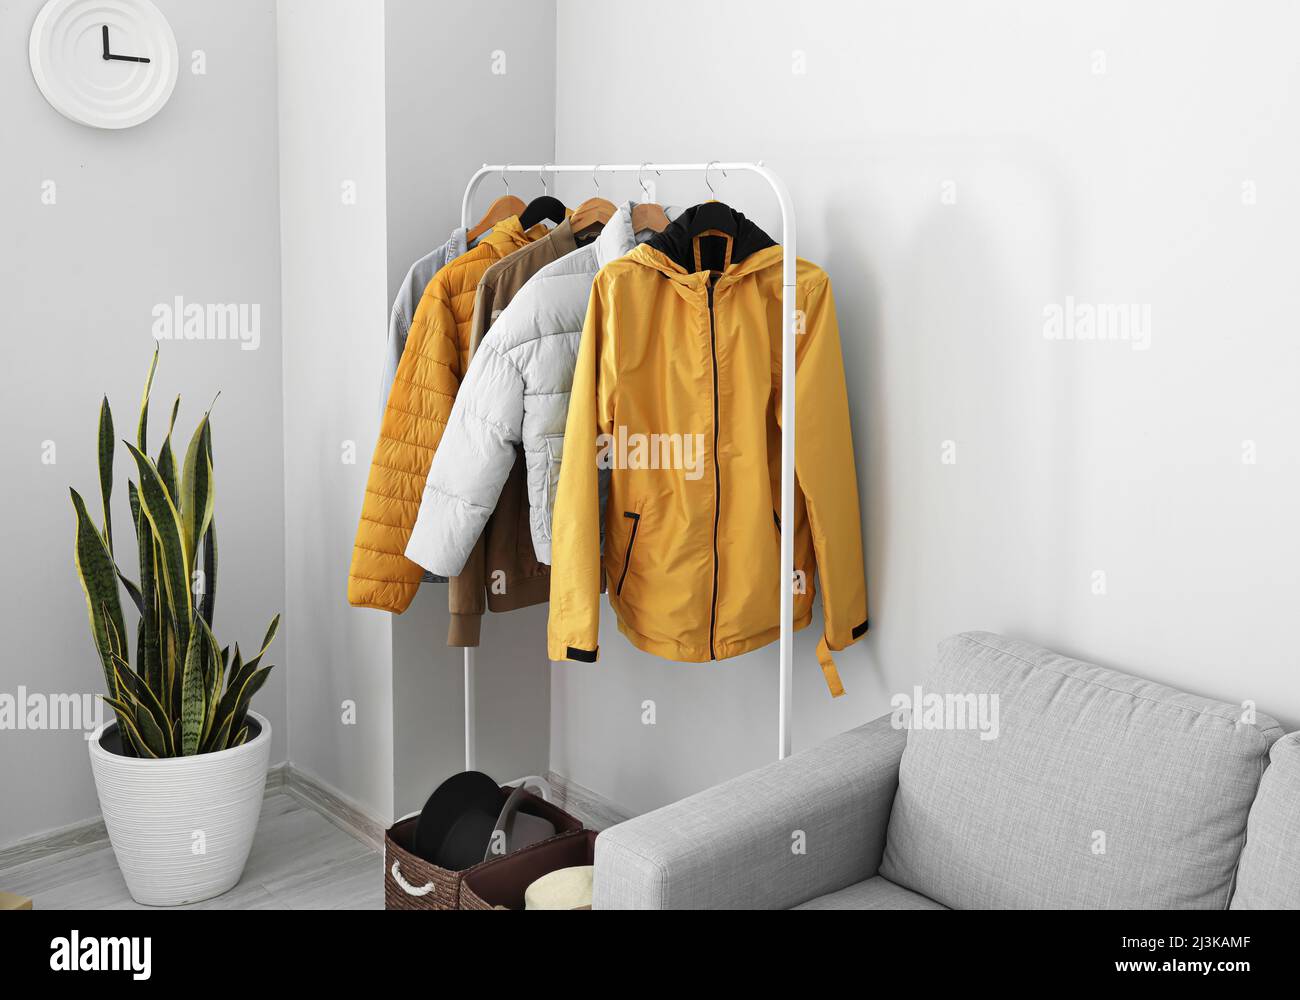 Rack with warm jackets near light wall in living room Stock Photo